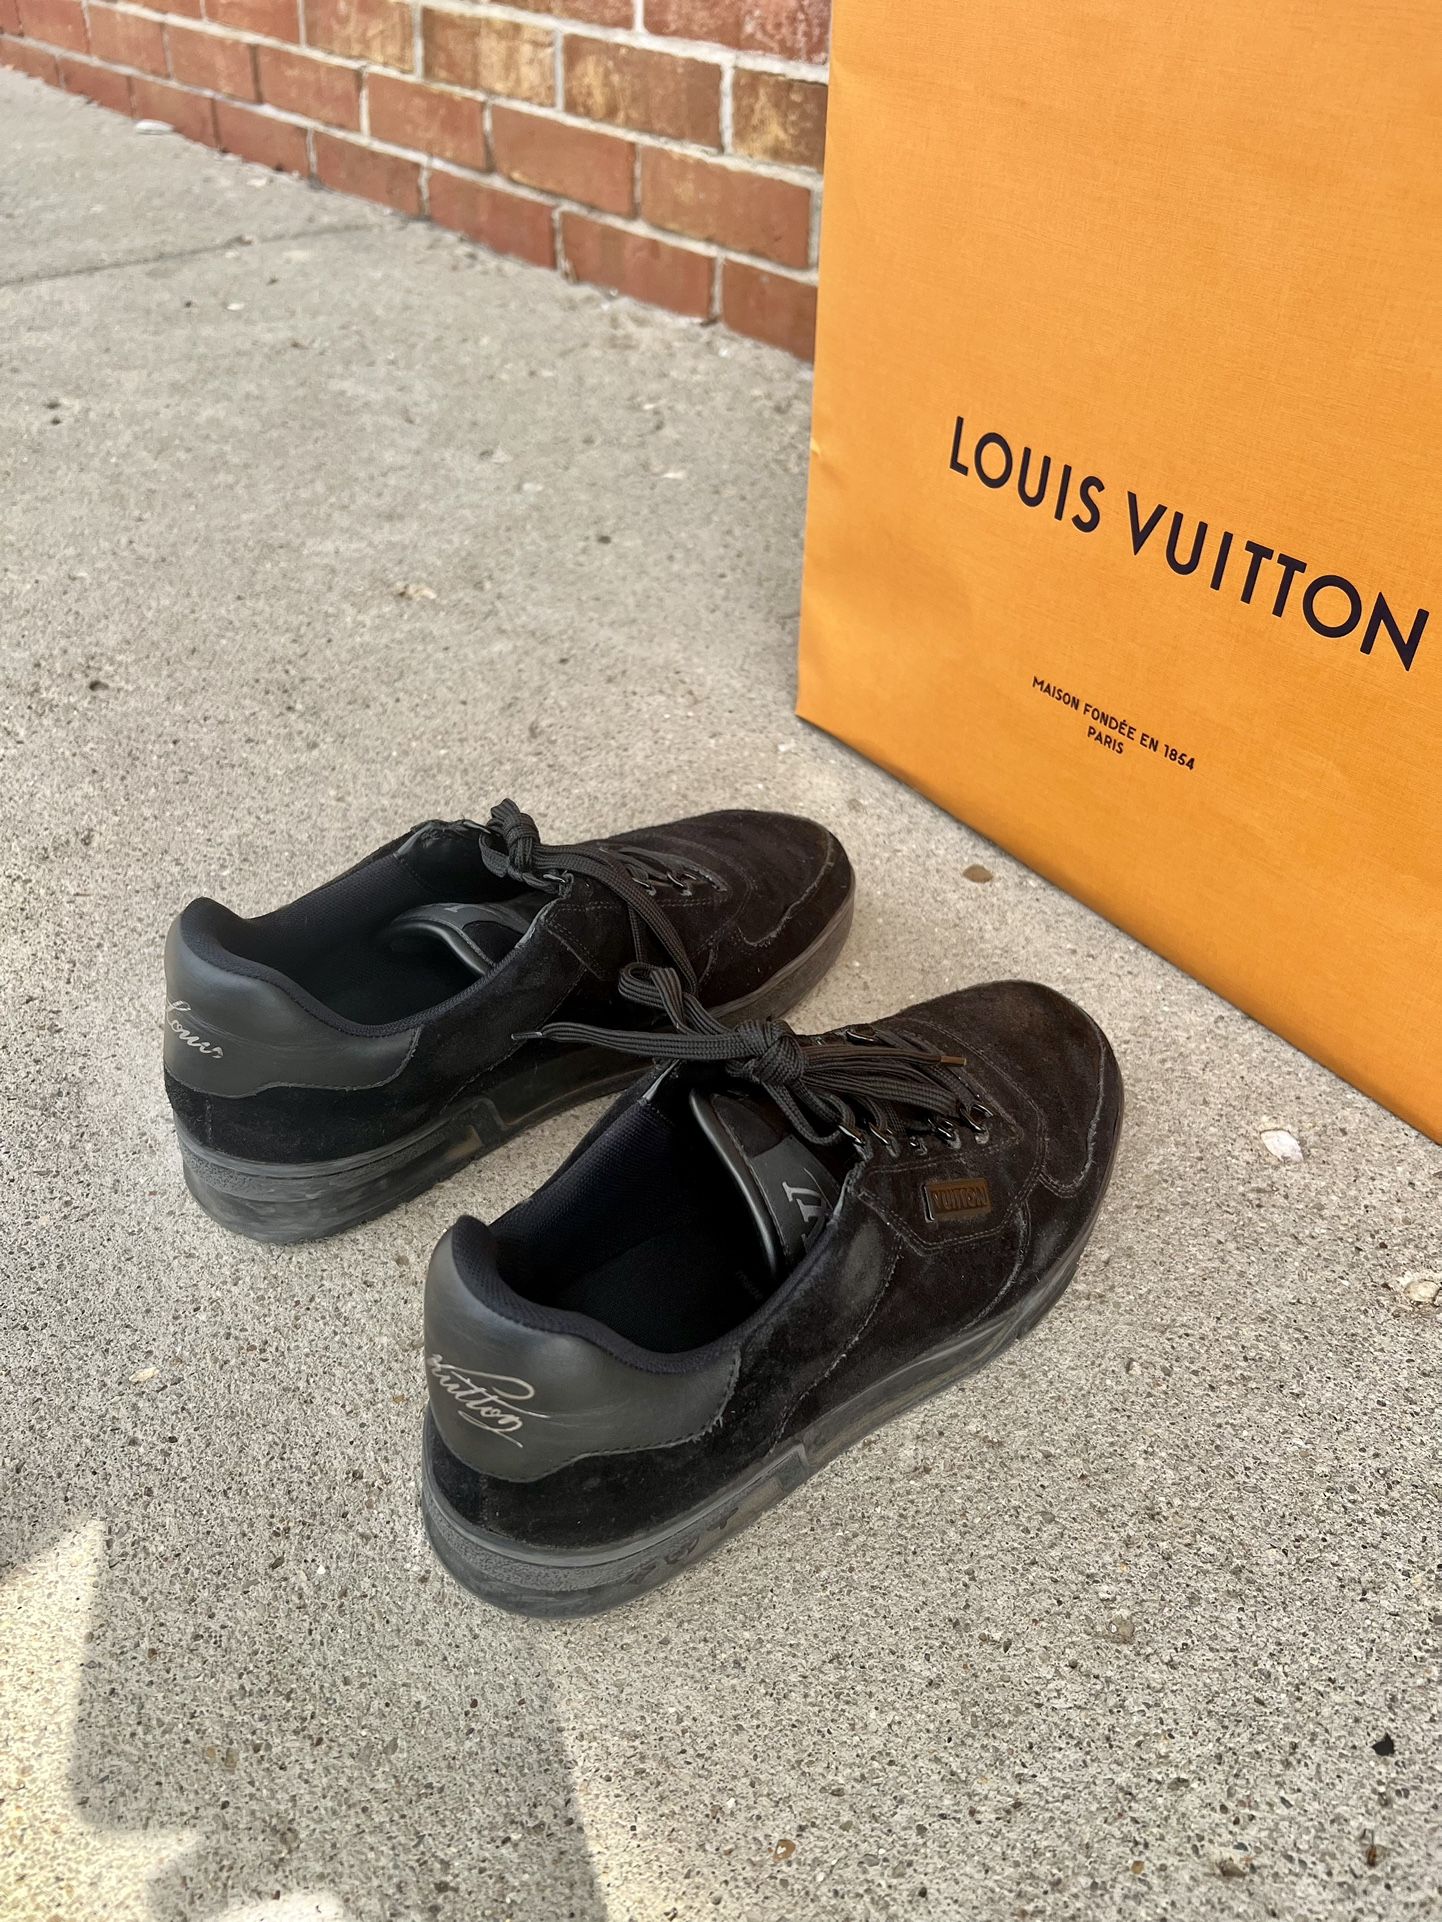 Louis Vuitton, Shoes, Louis Vuitton Oh Really Suede